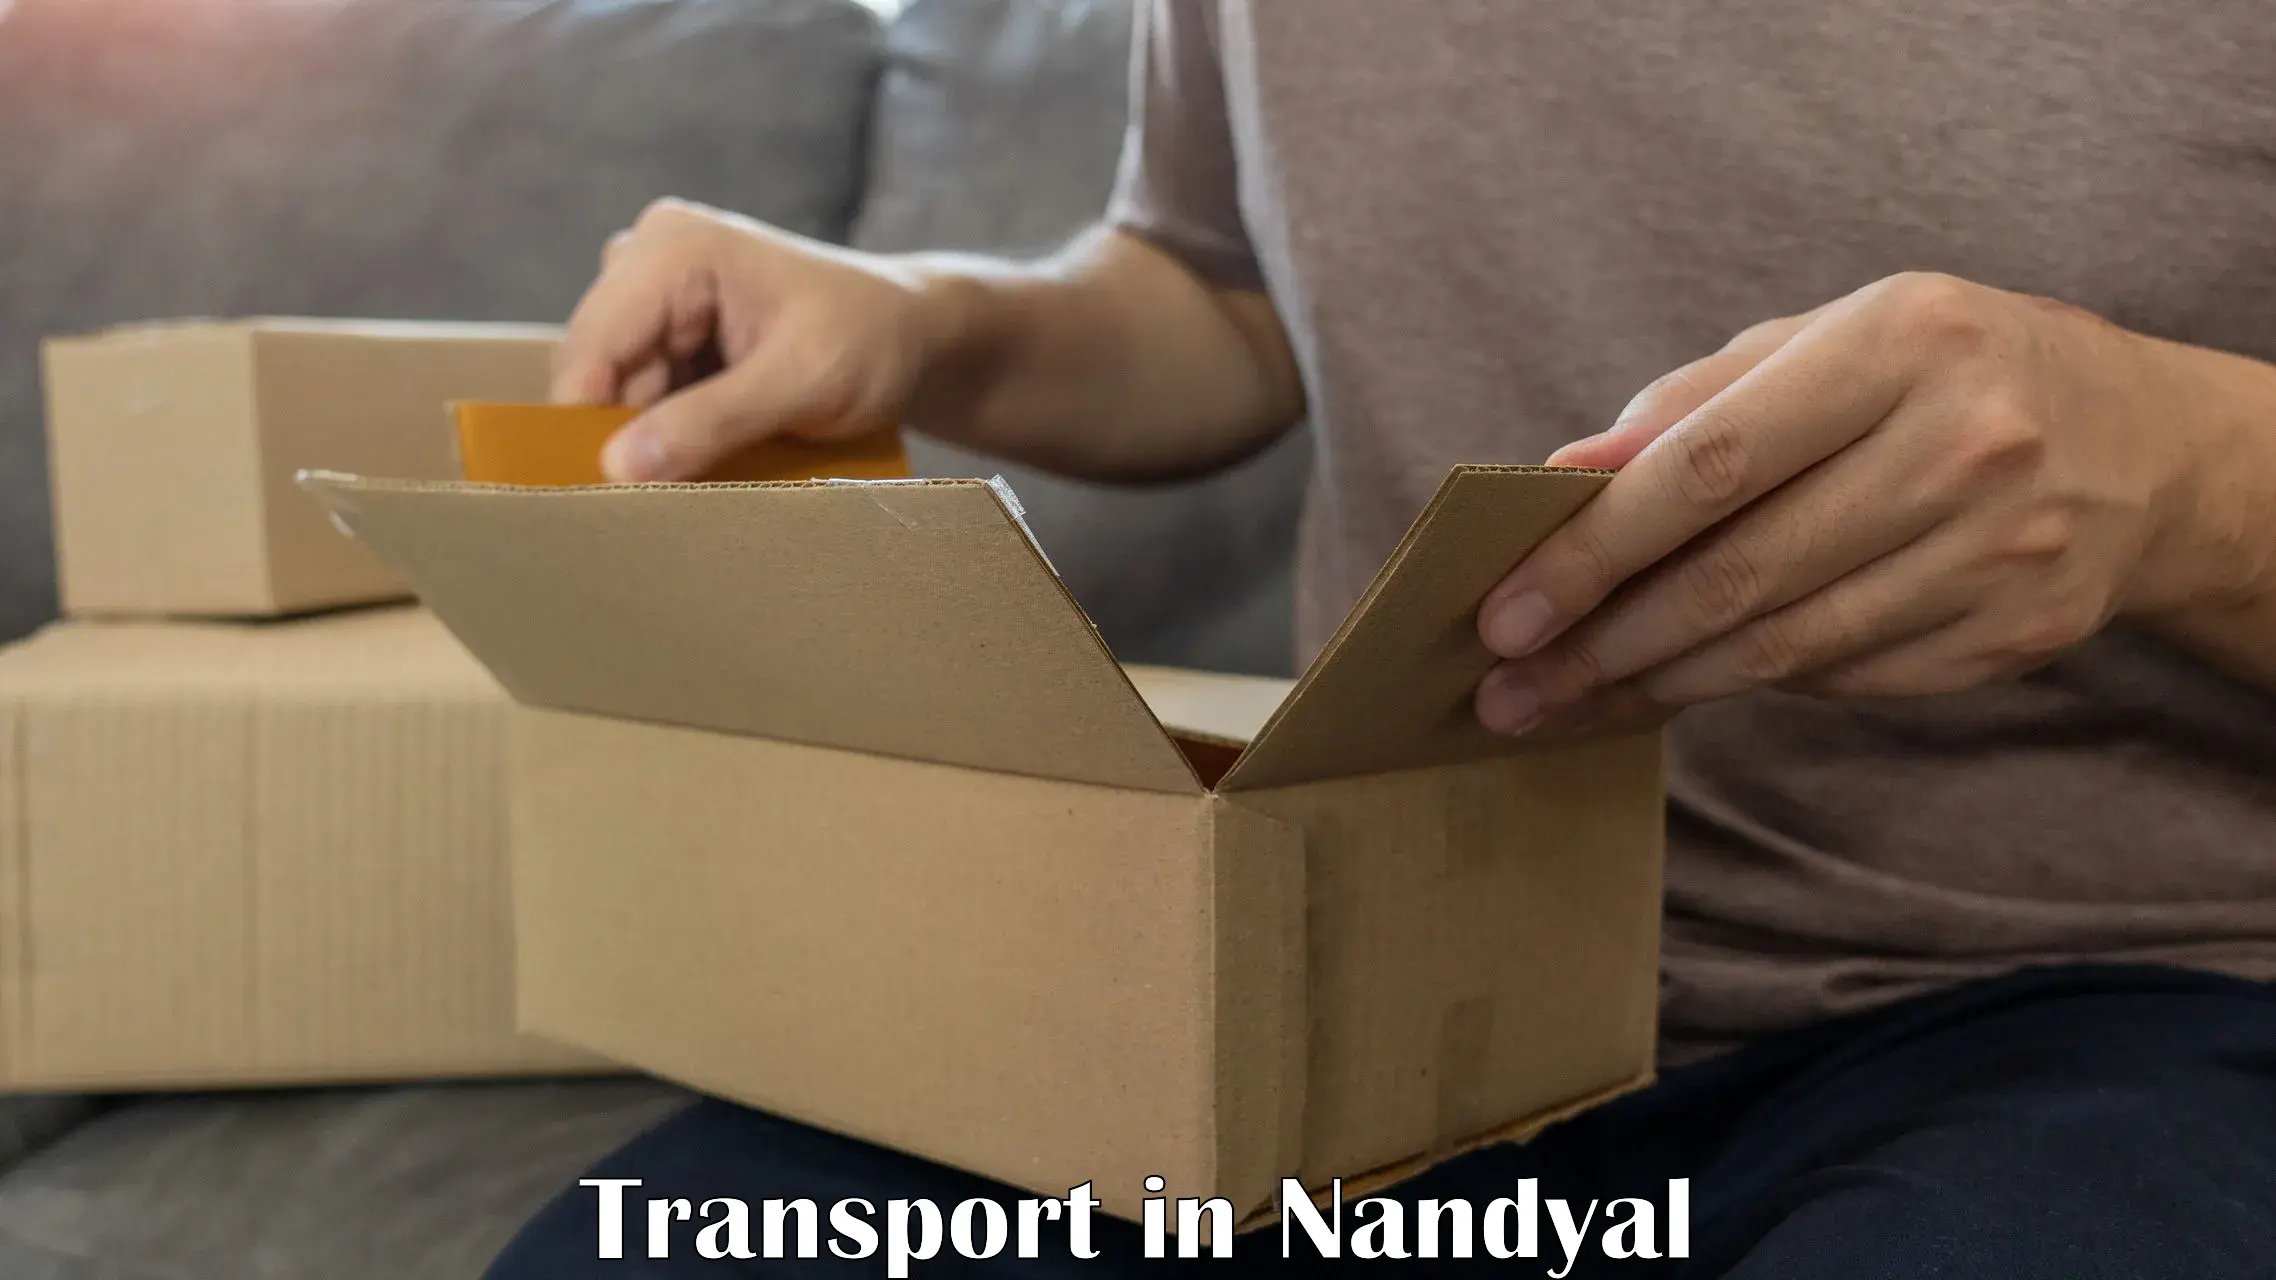 Goods delivery service in Nandyal